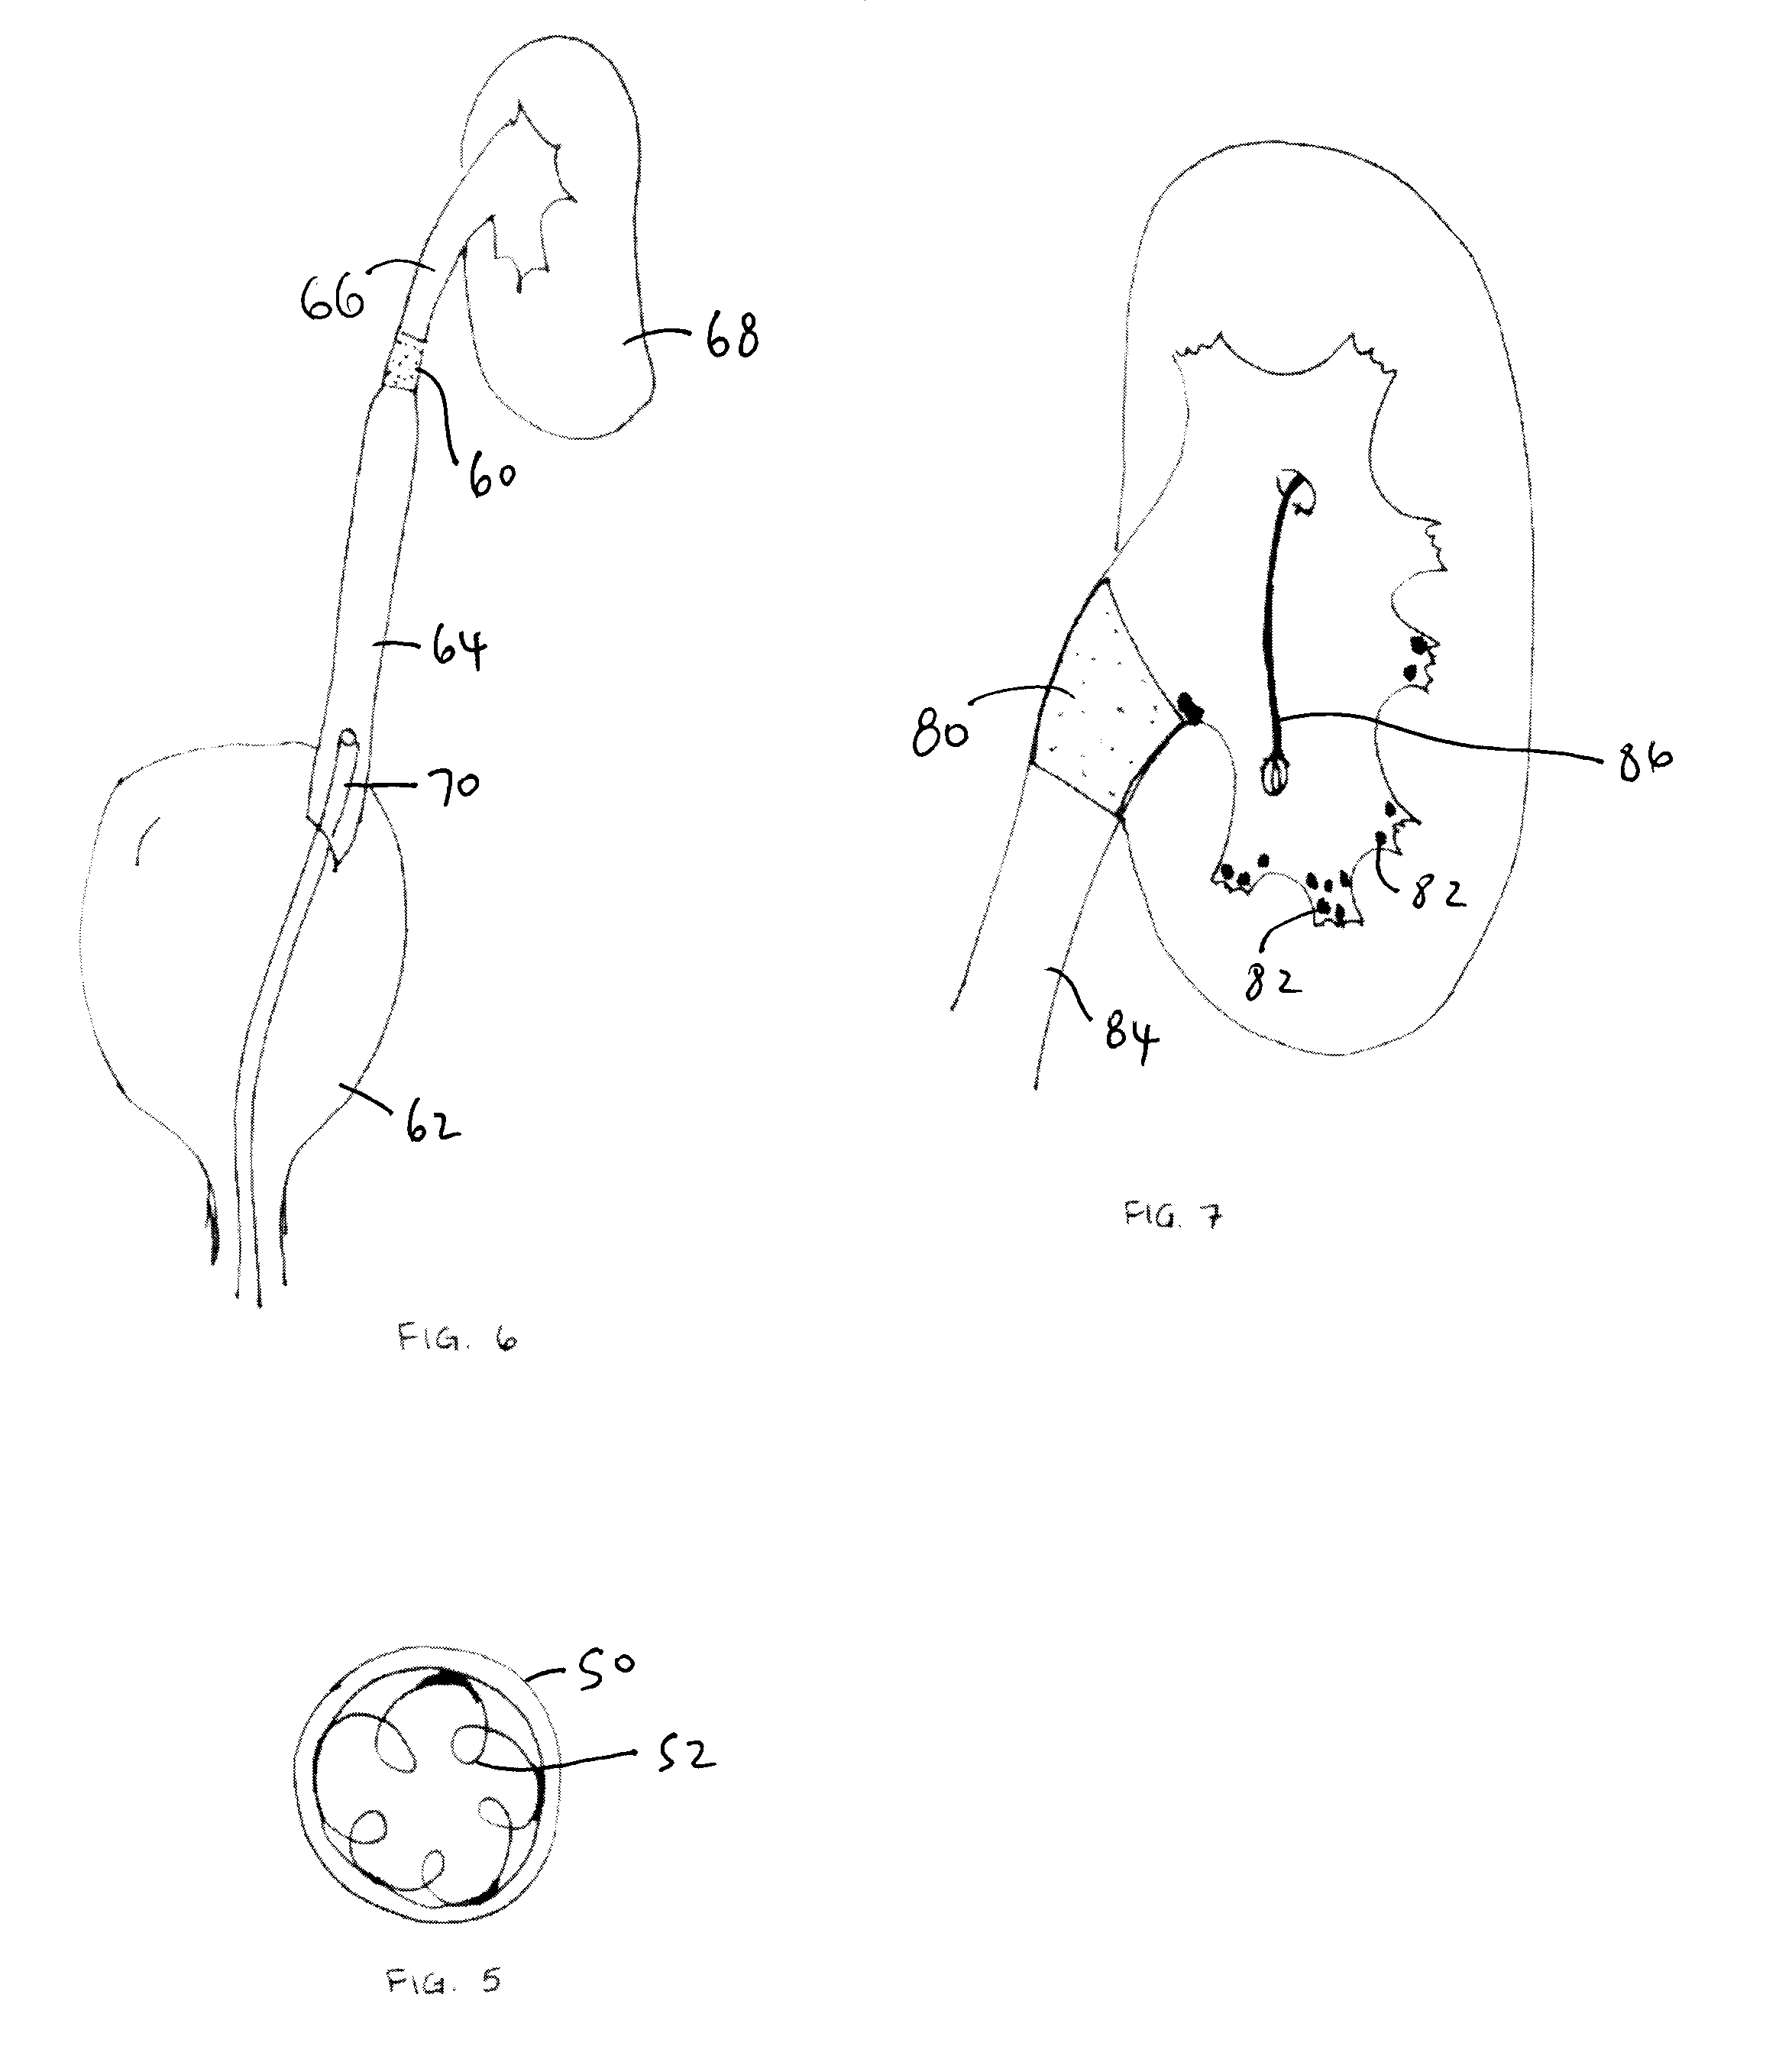 Methods and Apparatus for Temporarily Occluding Body Lumens